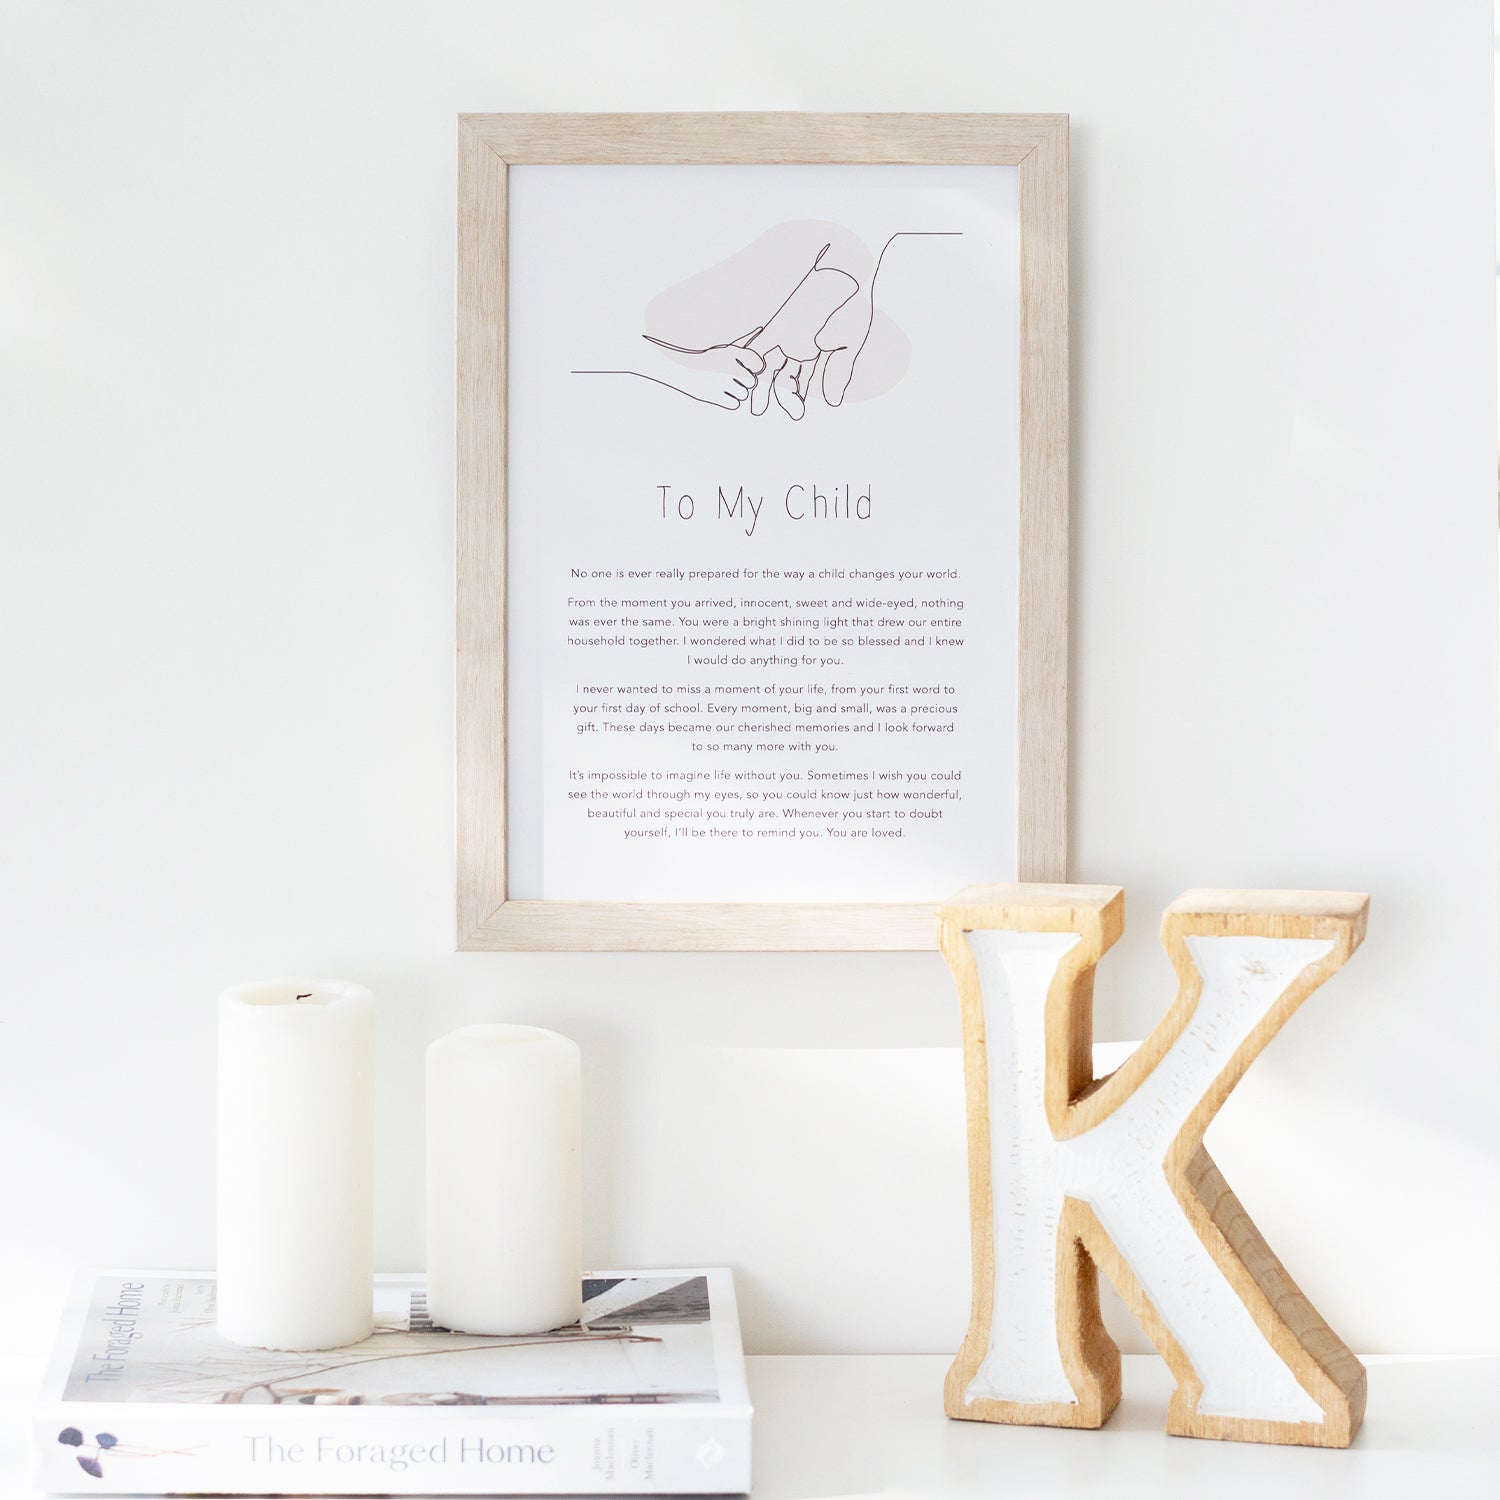 GIFT OF WORDS WOODEN FRAME "TO MY CHILD"